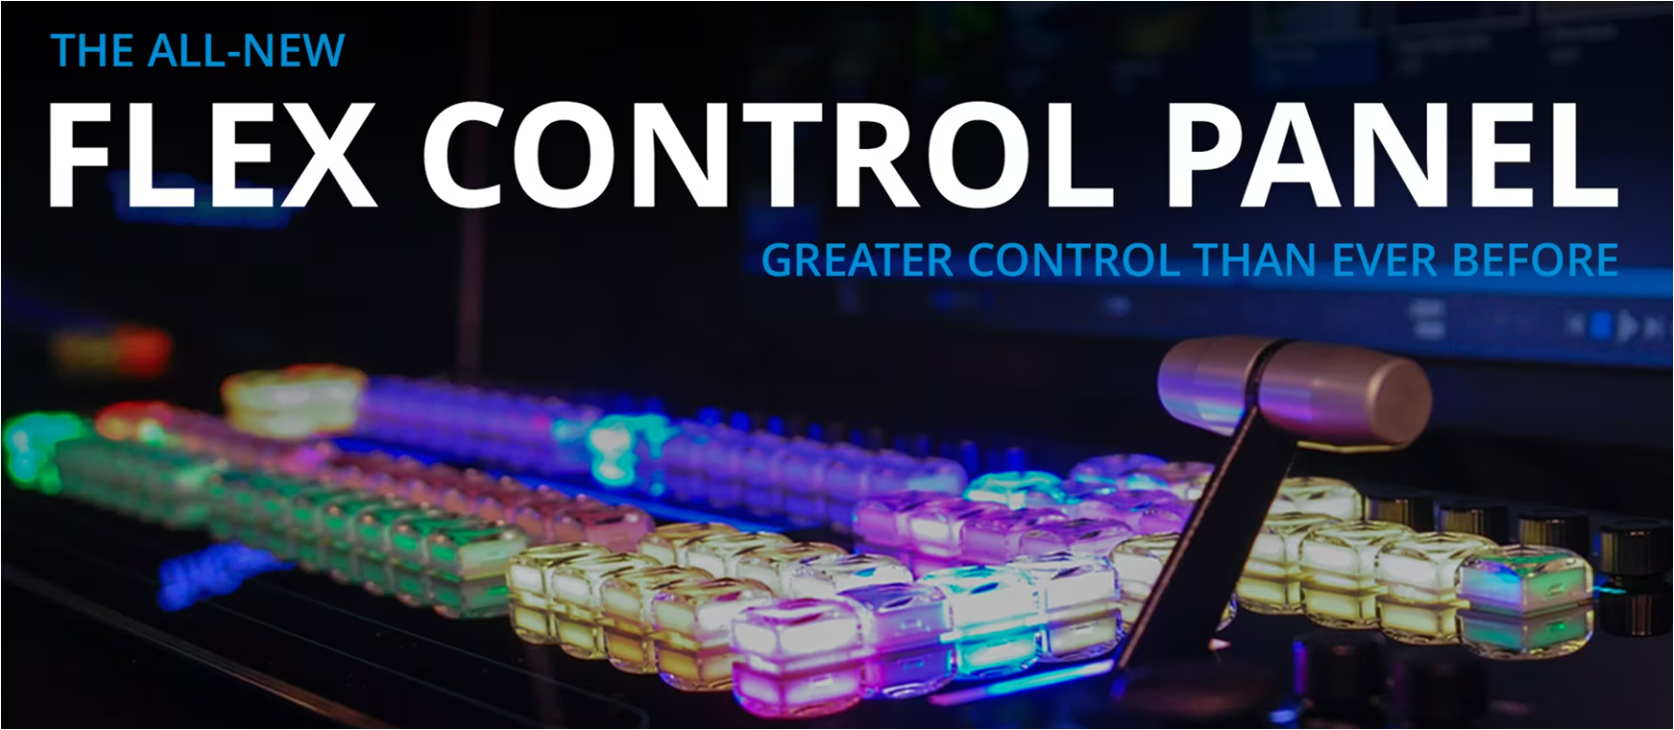 Greater control than ever before